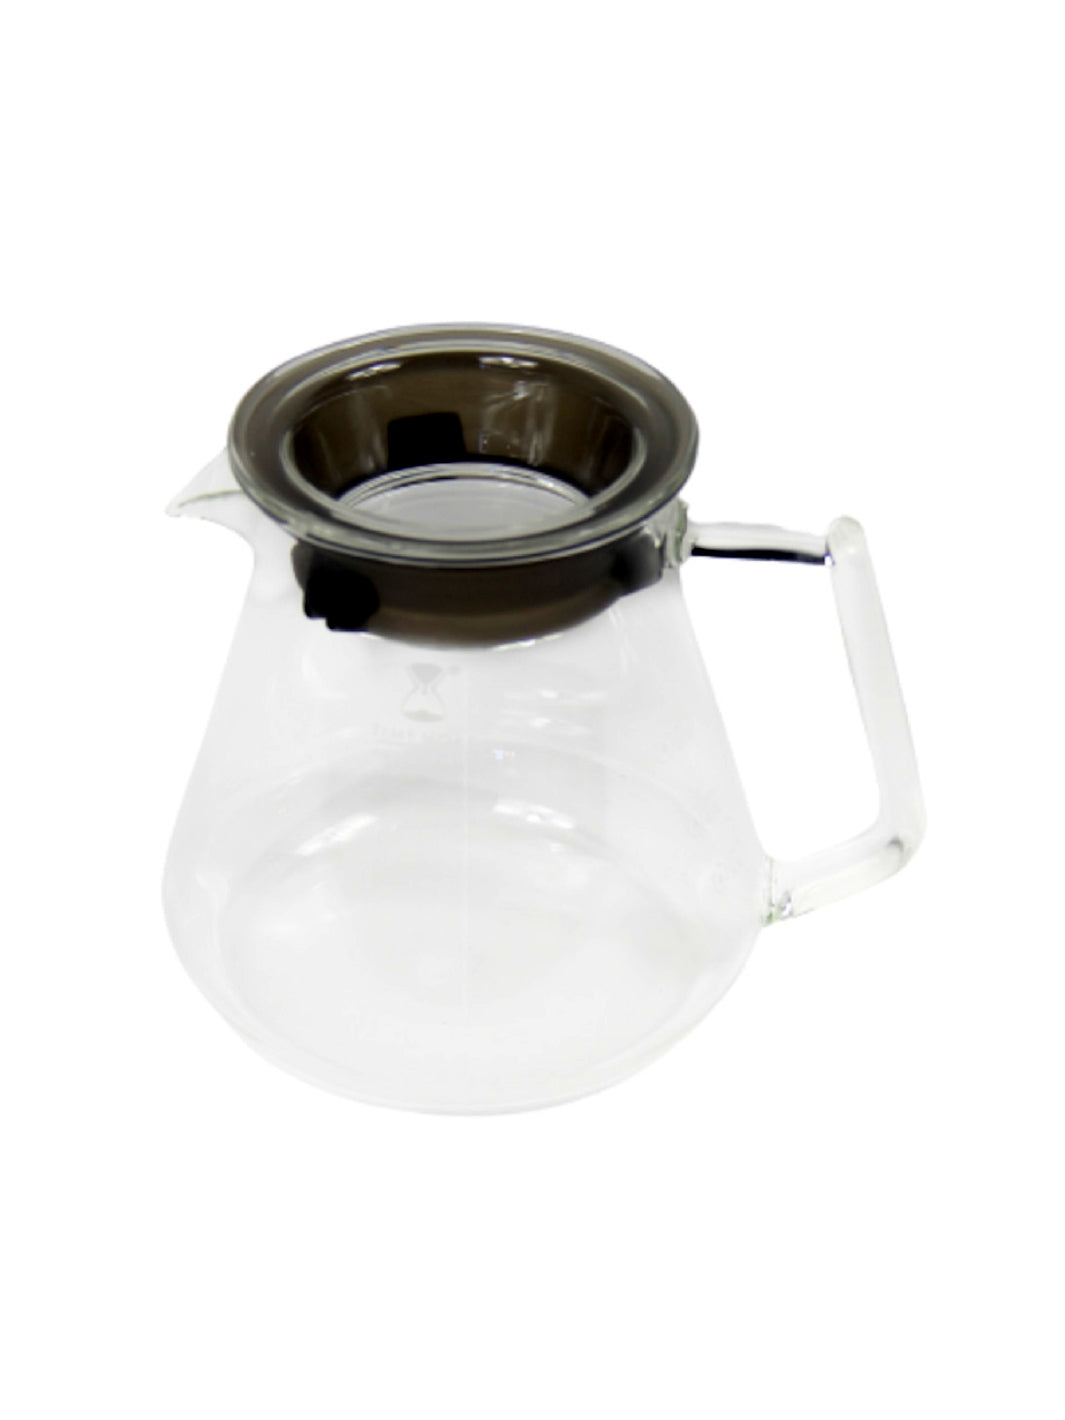 Timemore 360/ 600cc Carafes - Clear / Smoke – Slow Pour Supply